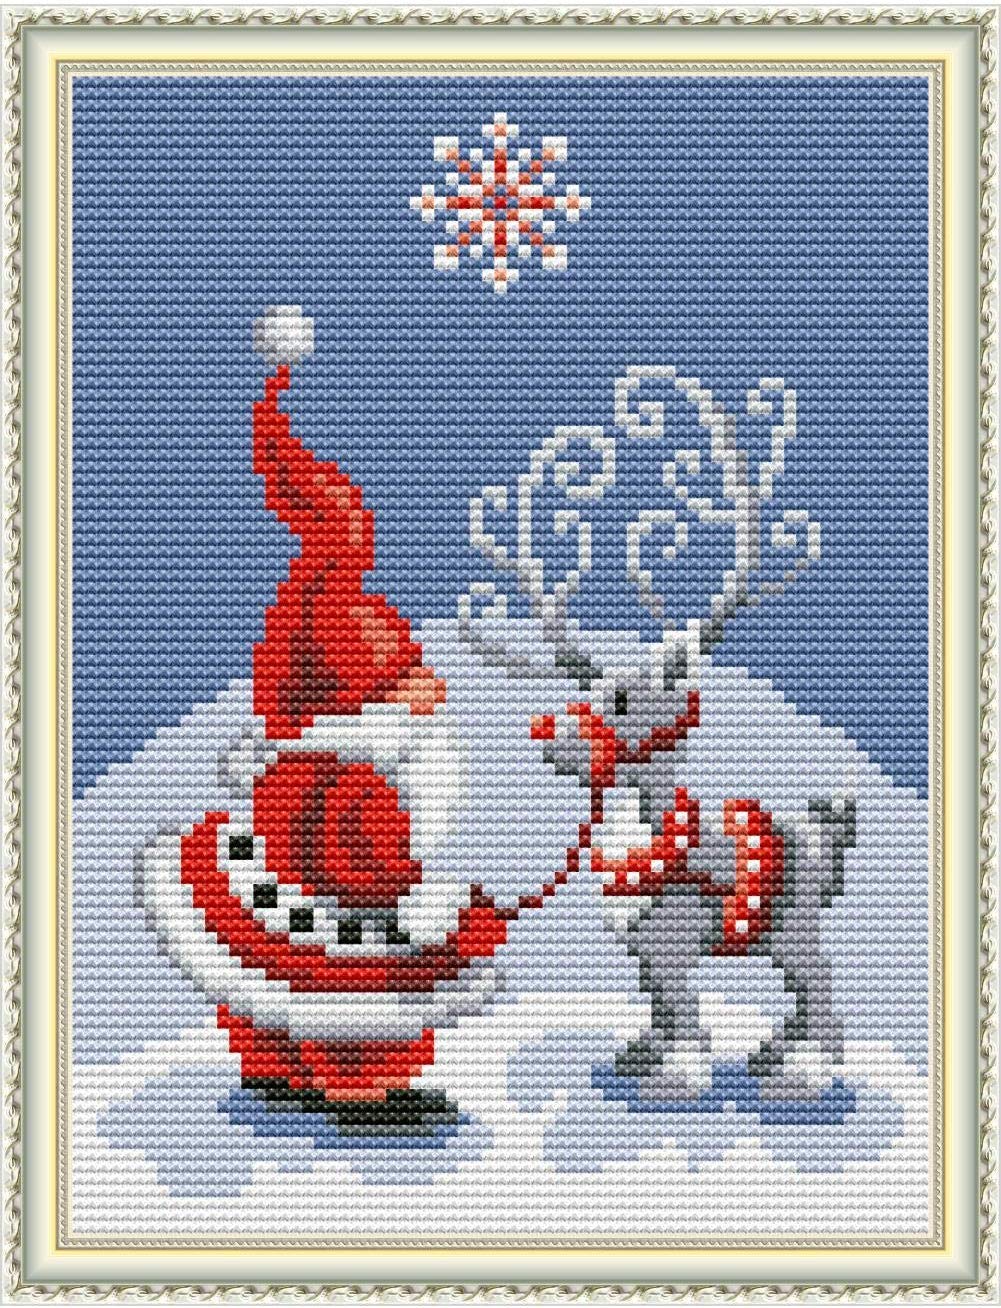 Cross Stitch Stamped Kits 11CT 9X11 inch Pre-Printed Cross-Stitching  Starter Patterns for Beginner Kids or Adults Embroidery Needlepoint Kits  Santa Claus Christmas Deer Christmas Deer 9x11 Inch